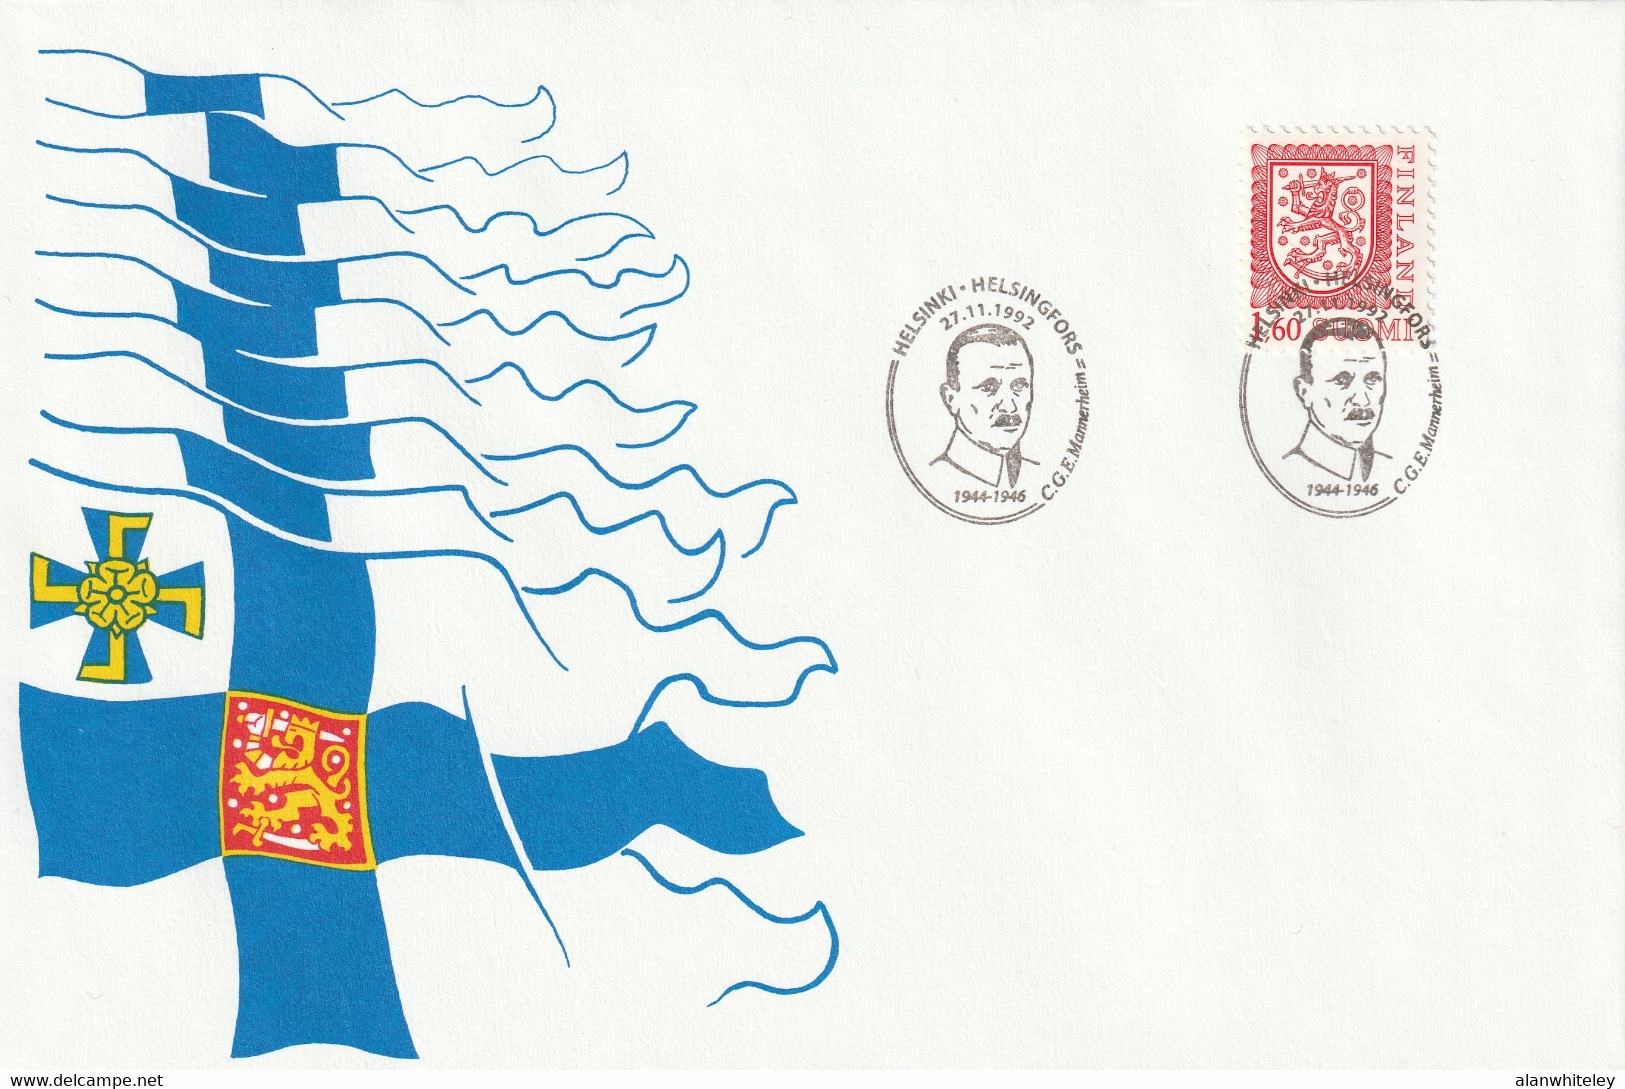 FINLAND 1992 Finnish Presidents: Set of 9 Comemmorative Covers CANCELLED